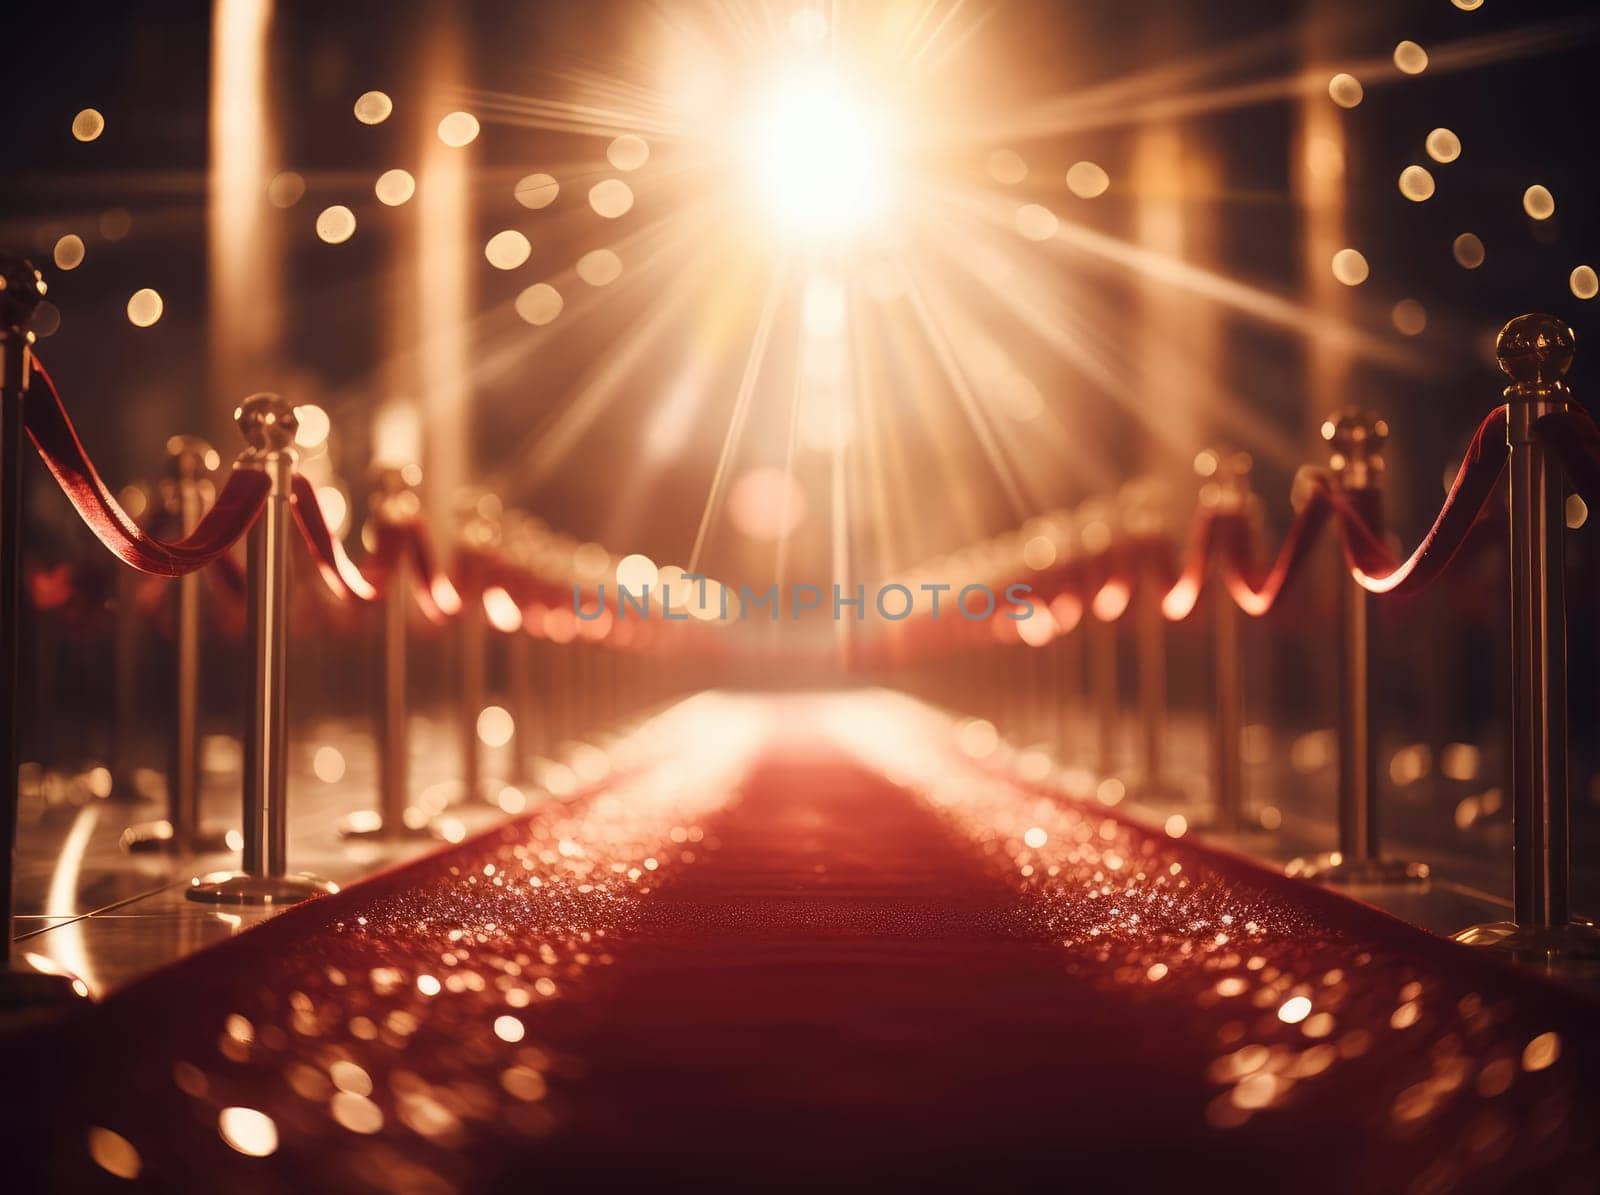 Red carpet for cenomonies without people